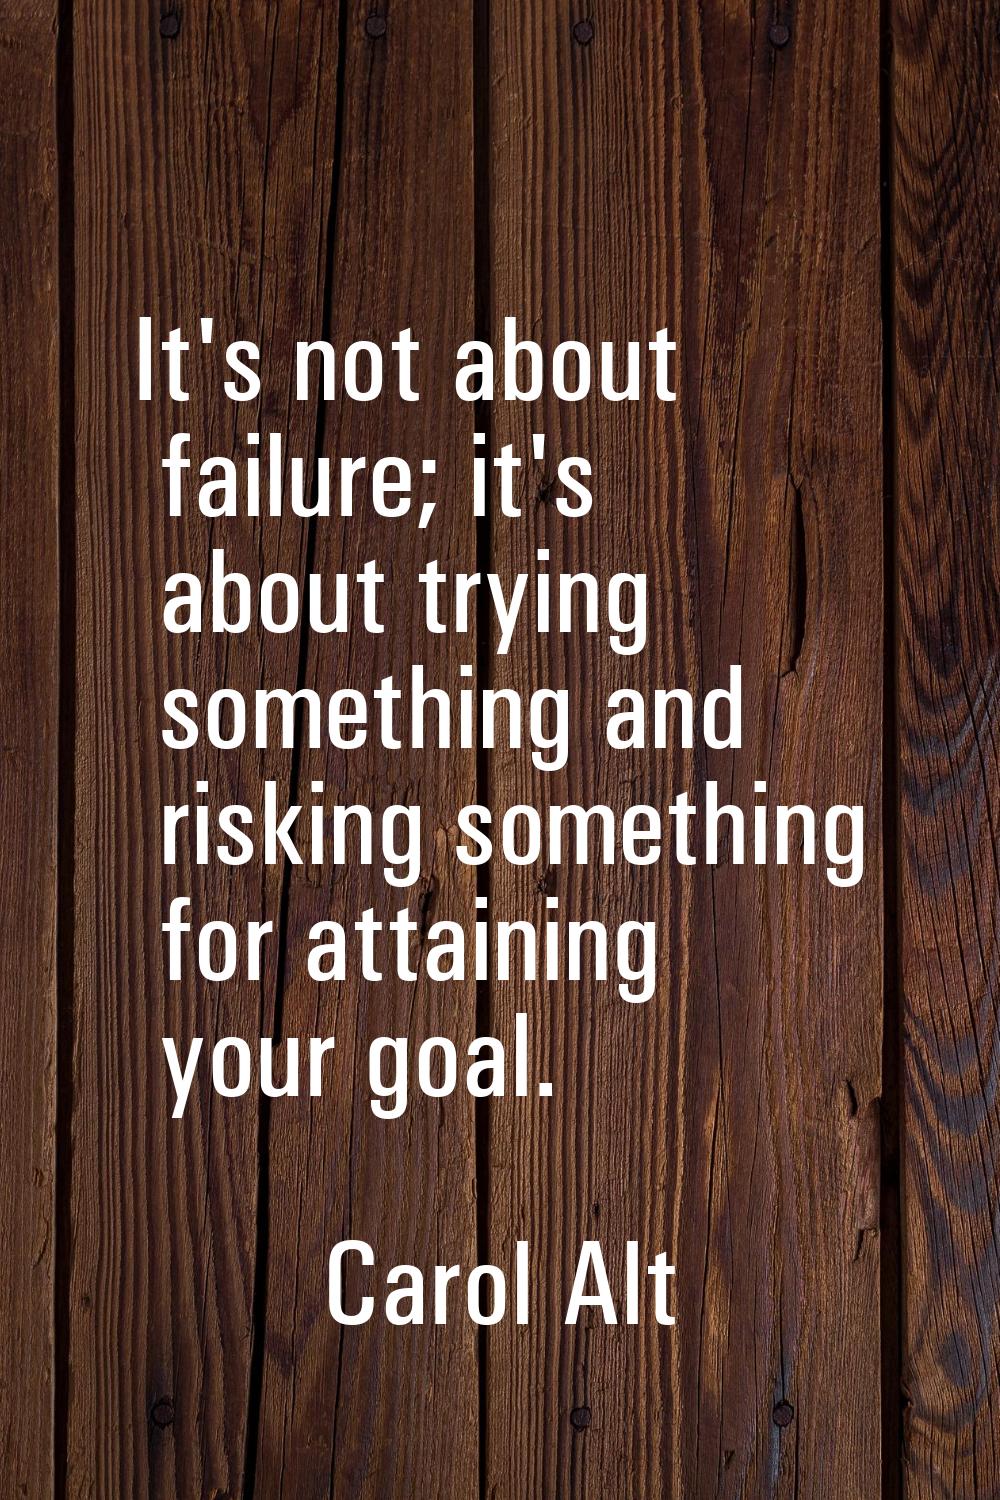 It's not about failure; it's about trying something and risking something for attaining your goal.